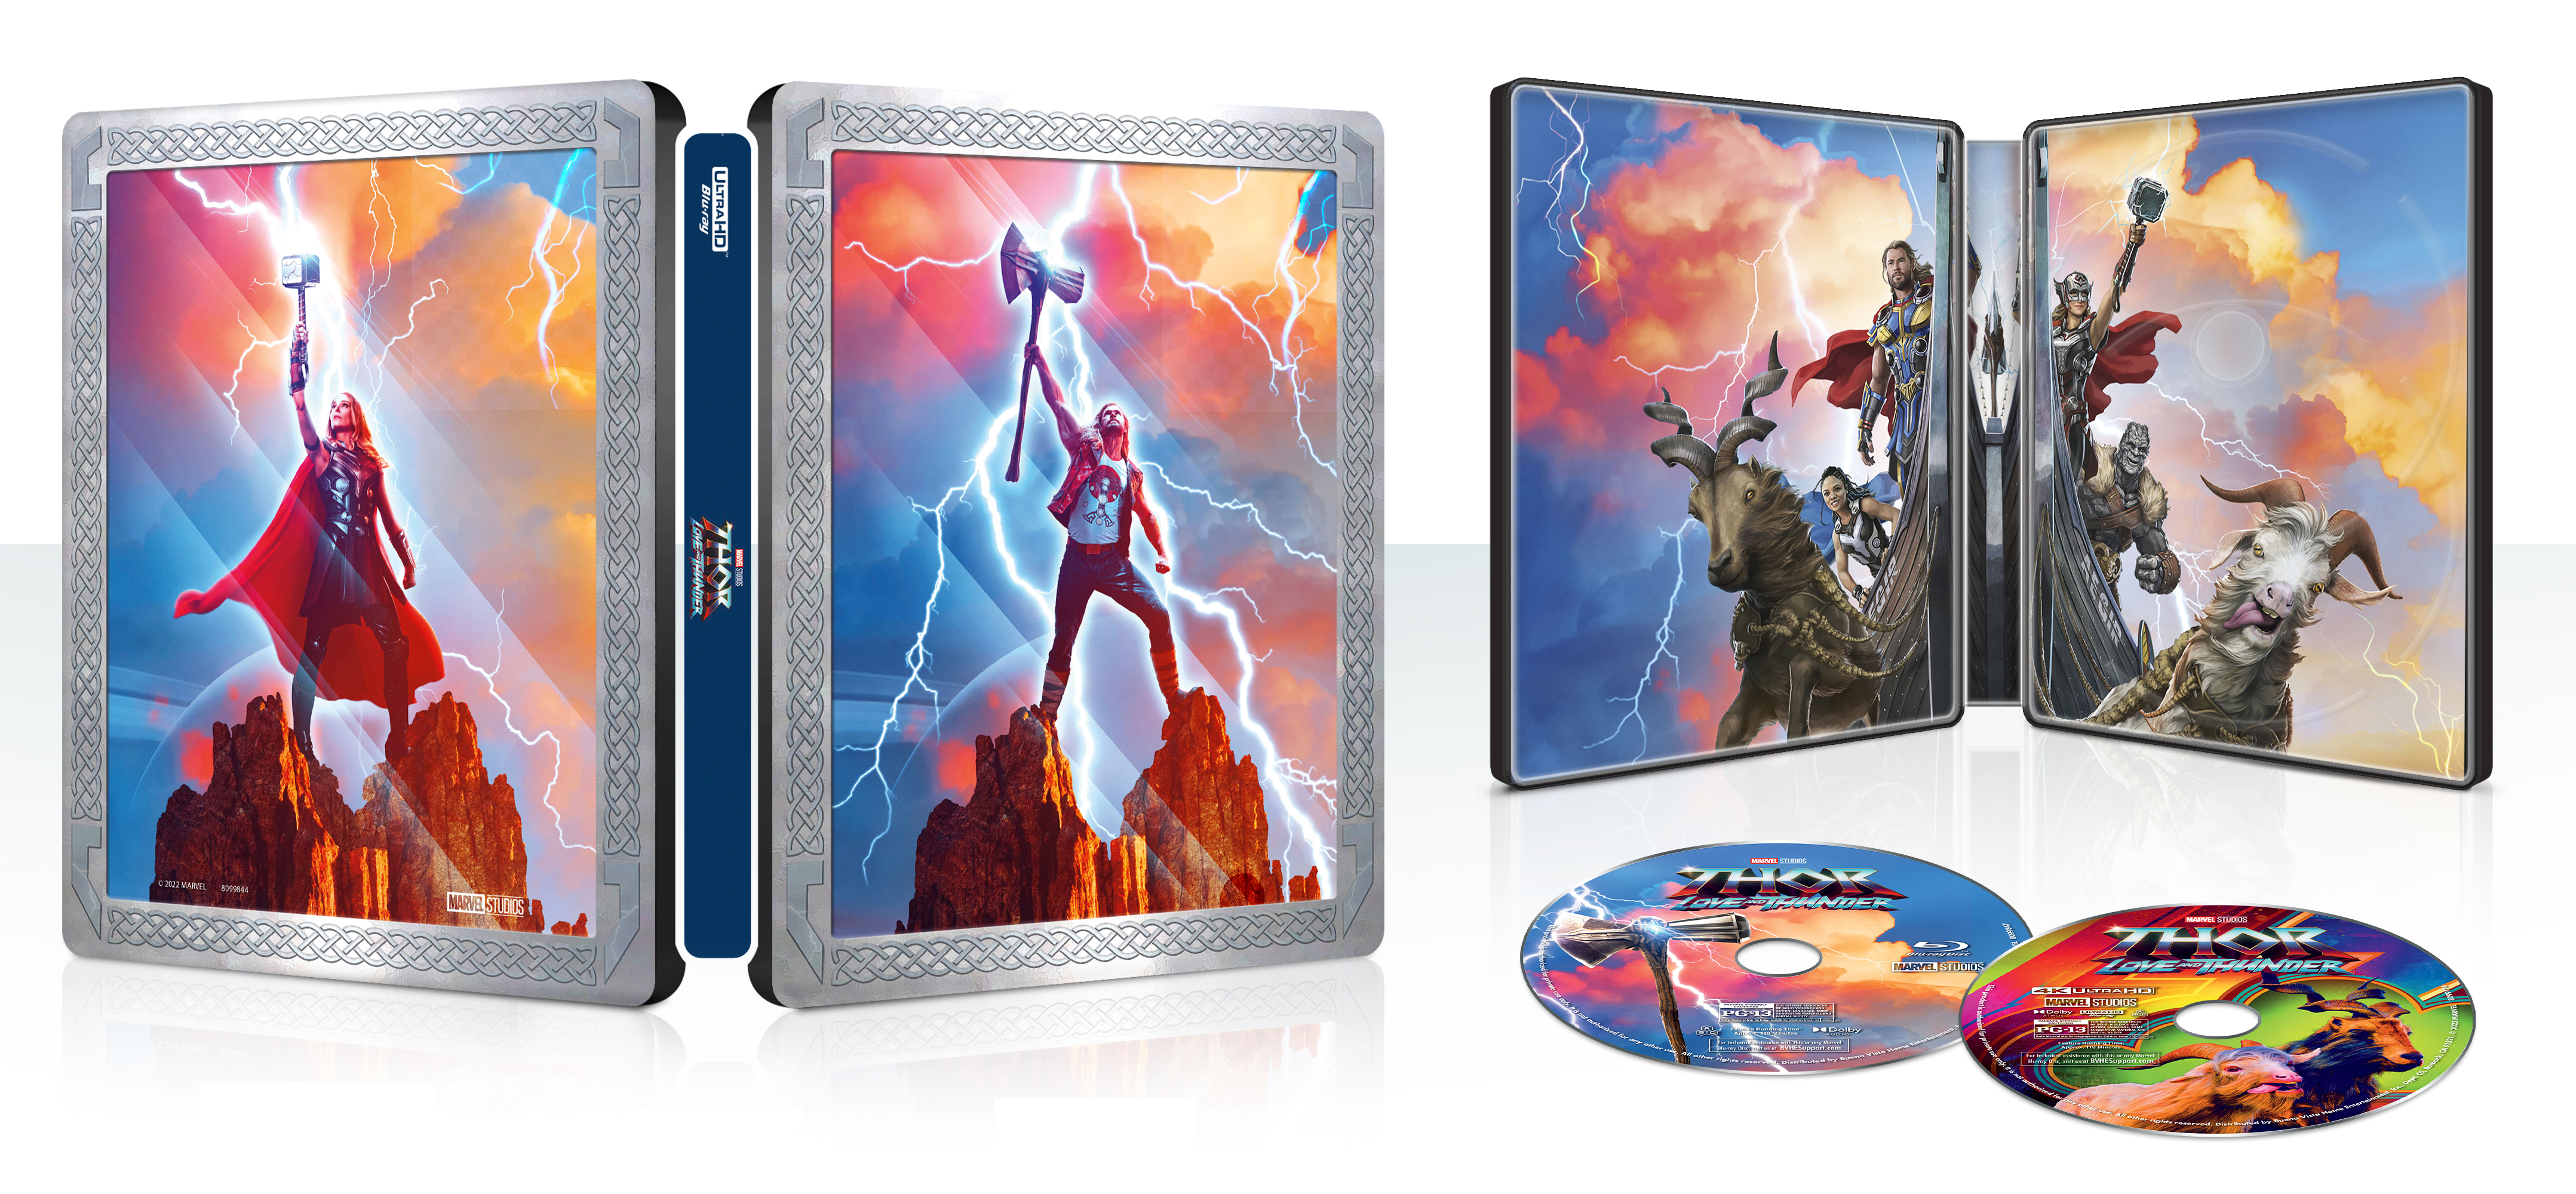 Thor: Love and Thunder (Ultra HD, 2022) for sale online